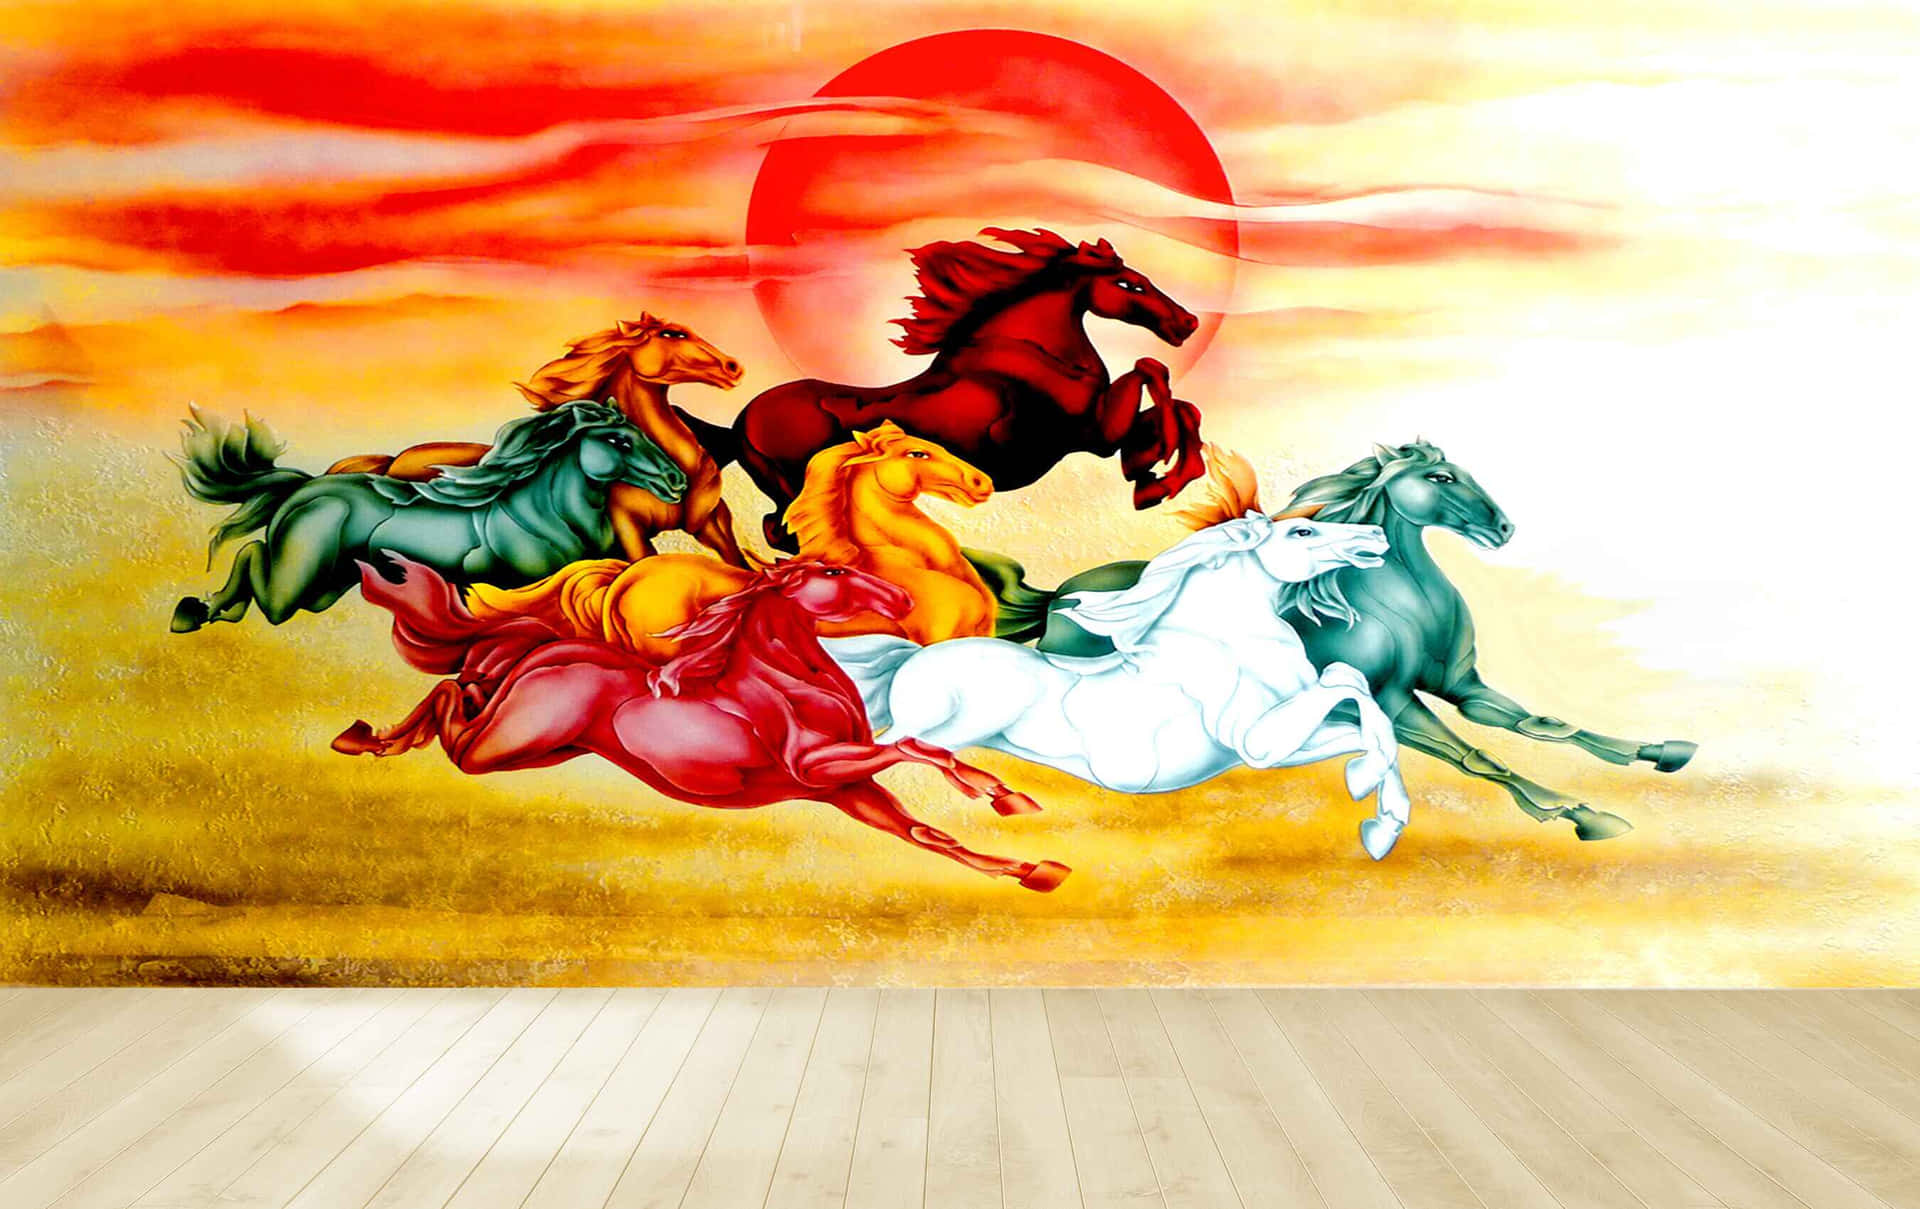 7 Horses Galloping Against Red Sun Wallpaper